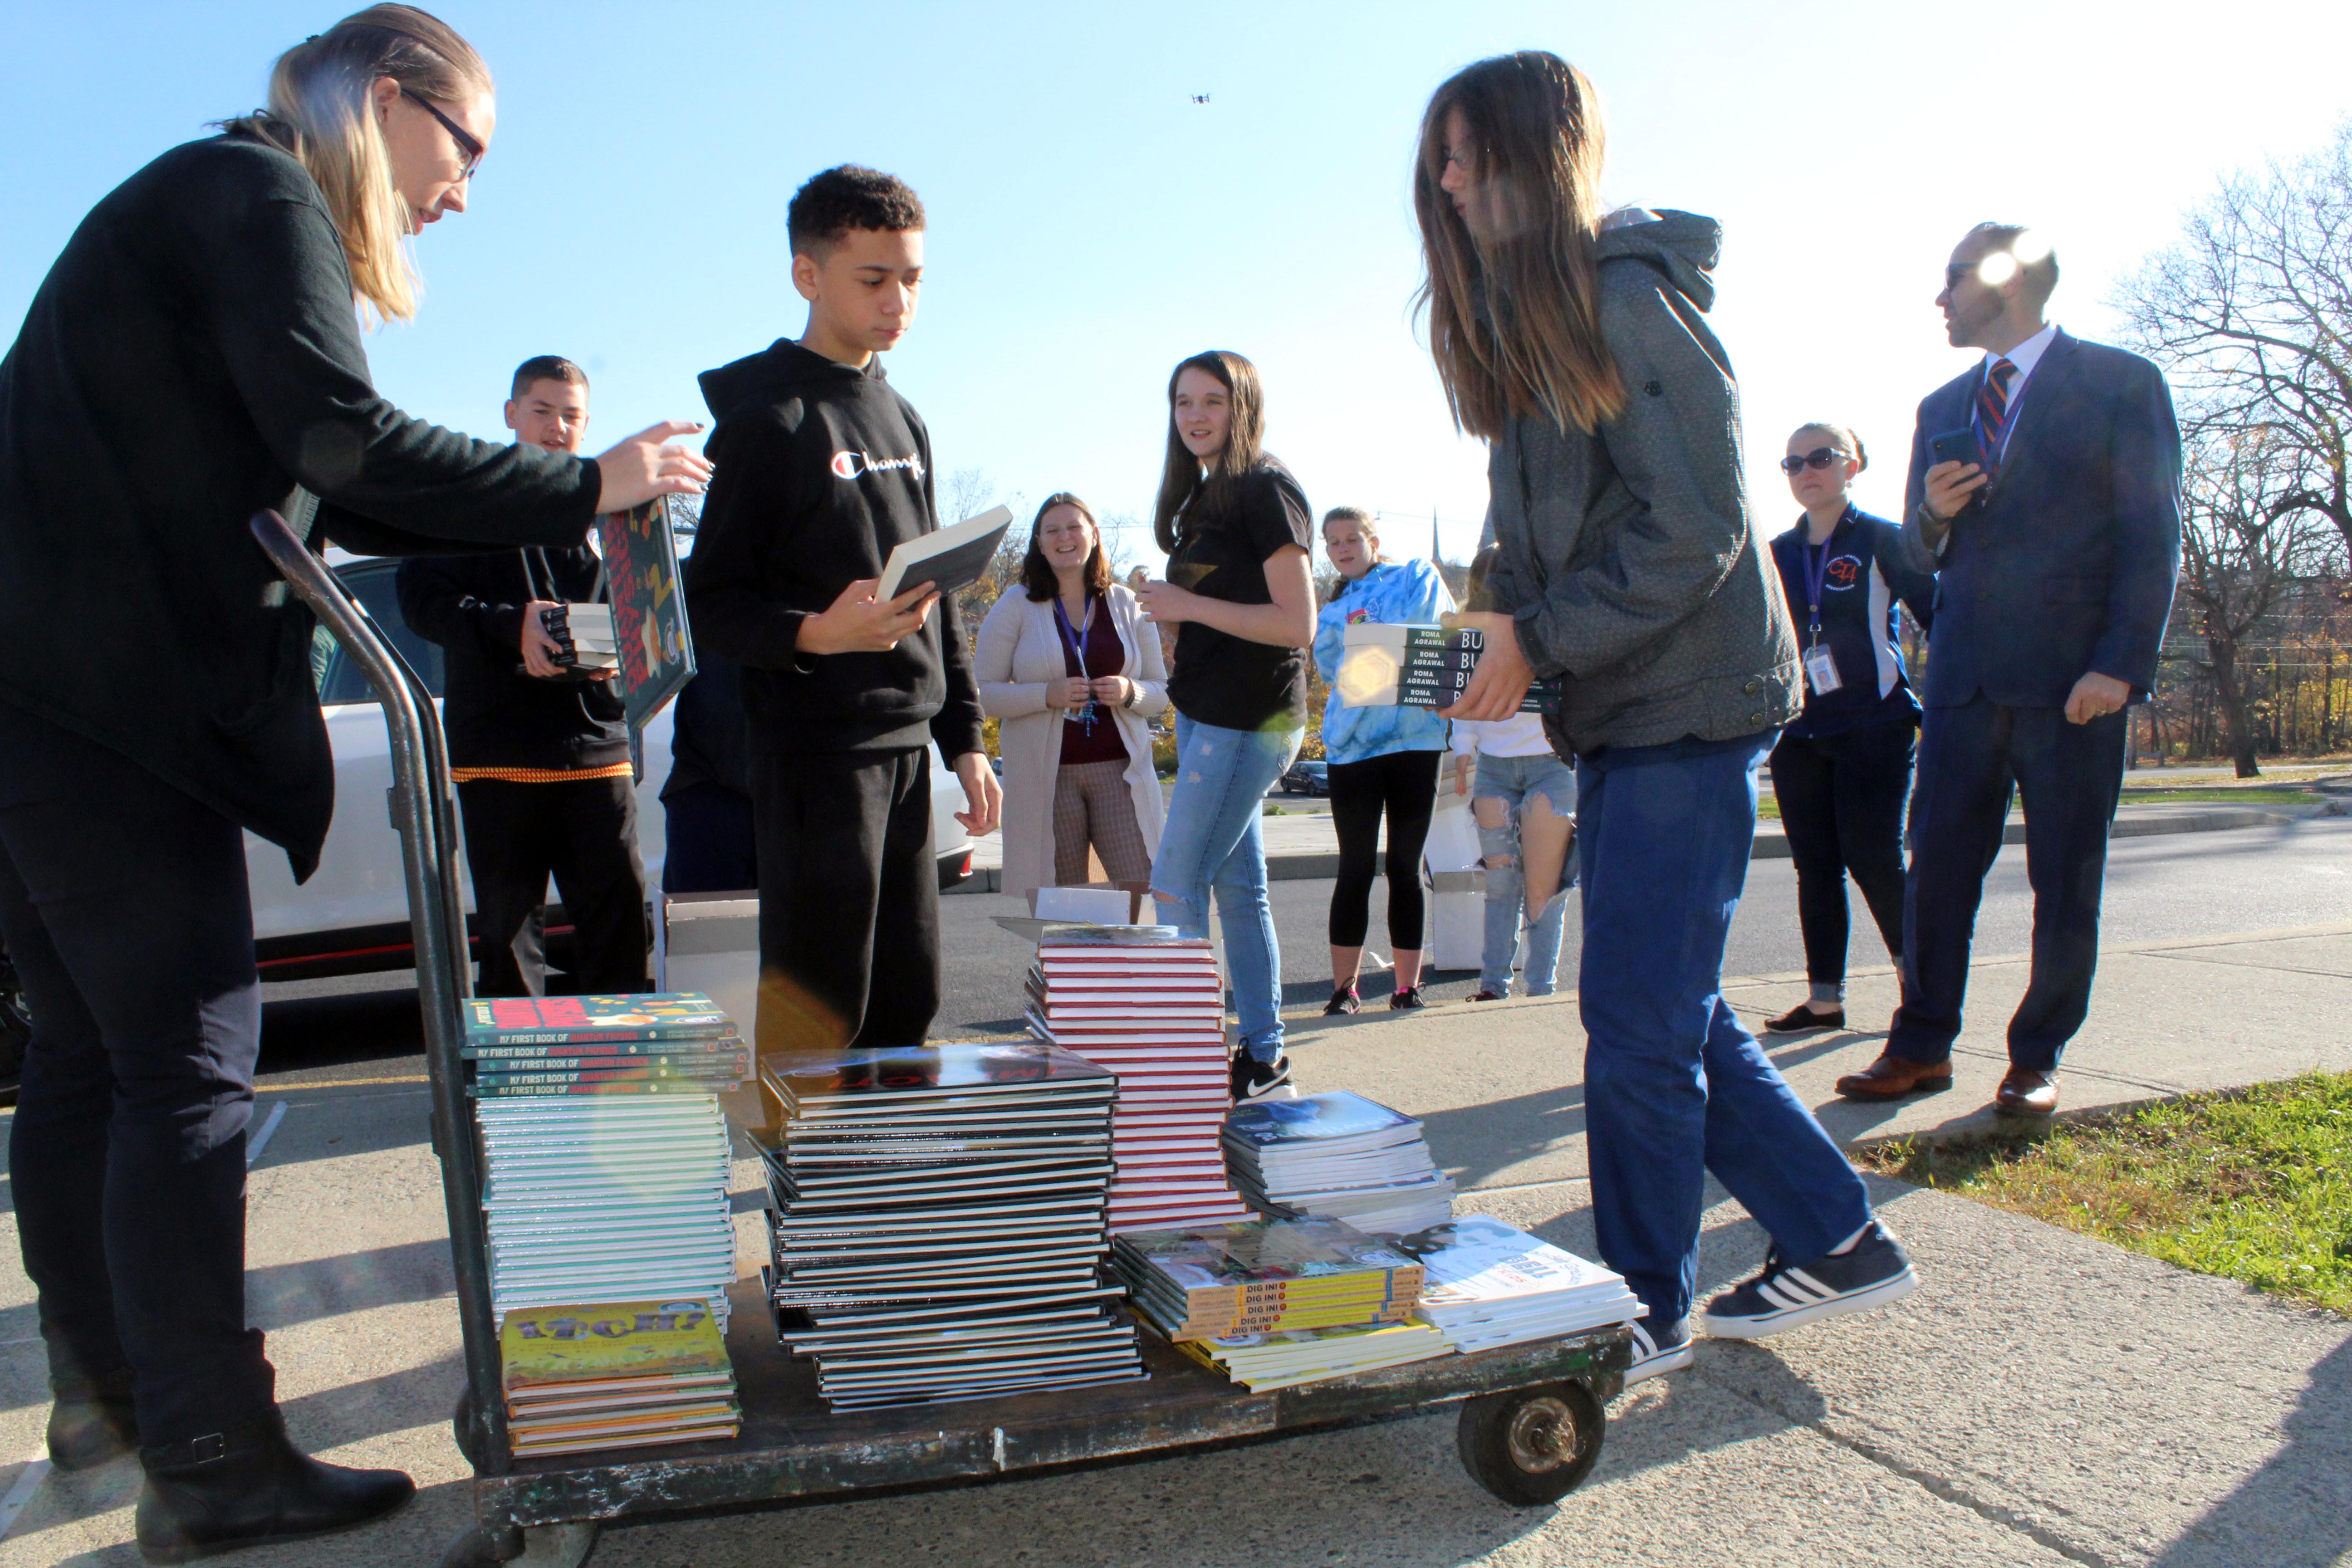 students stack books on cart